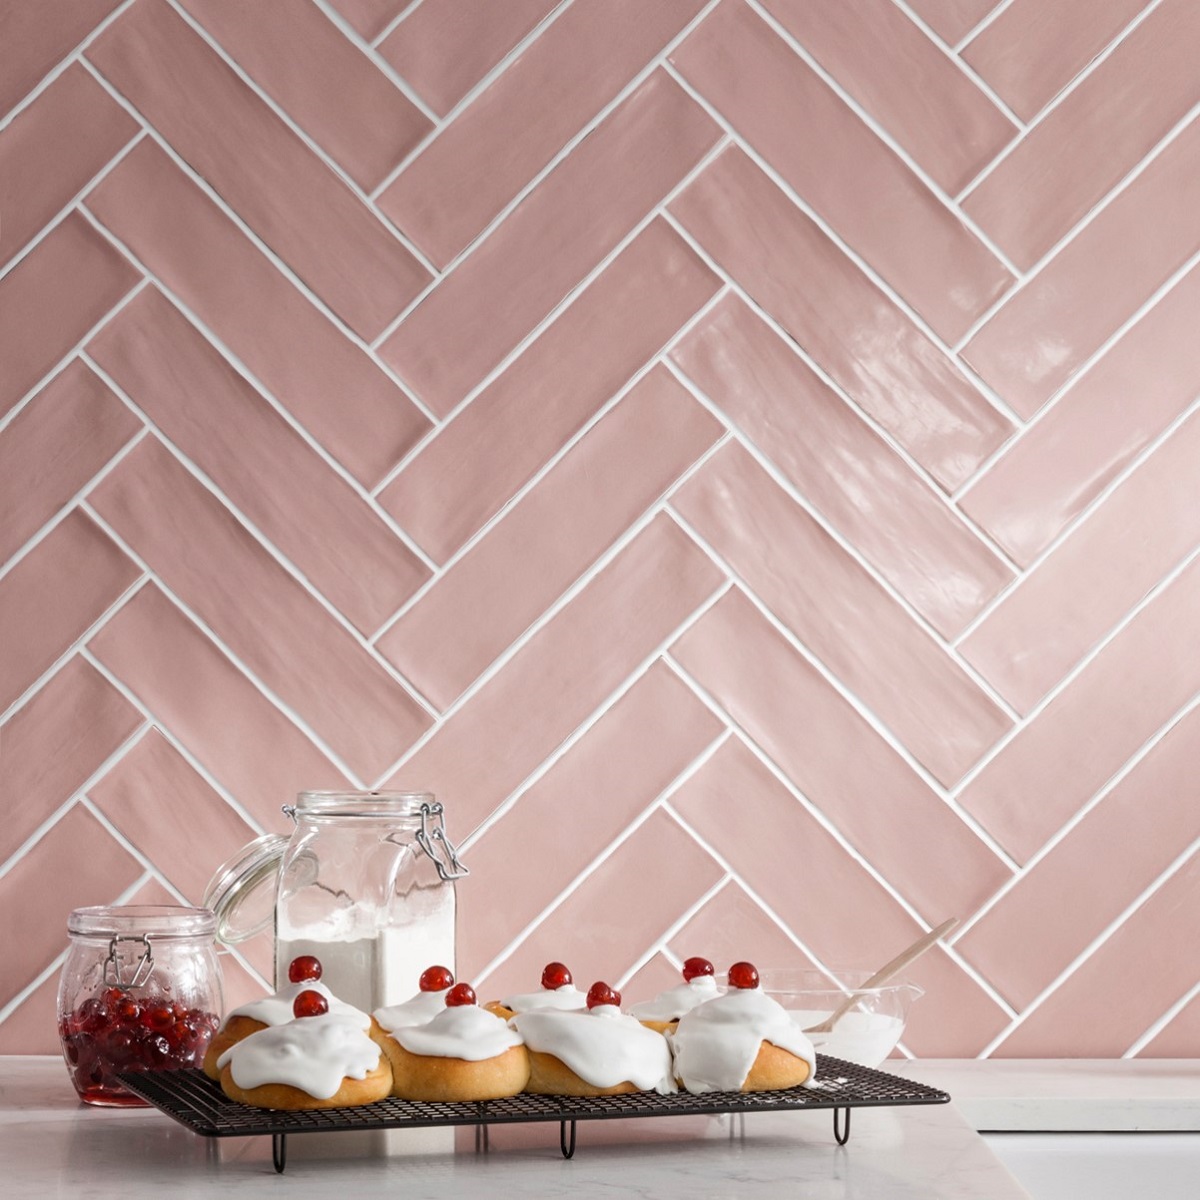 pink Poitiers tiles with contrasting white grout on the wall in herringbone pattern from CTD tiles